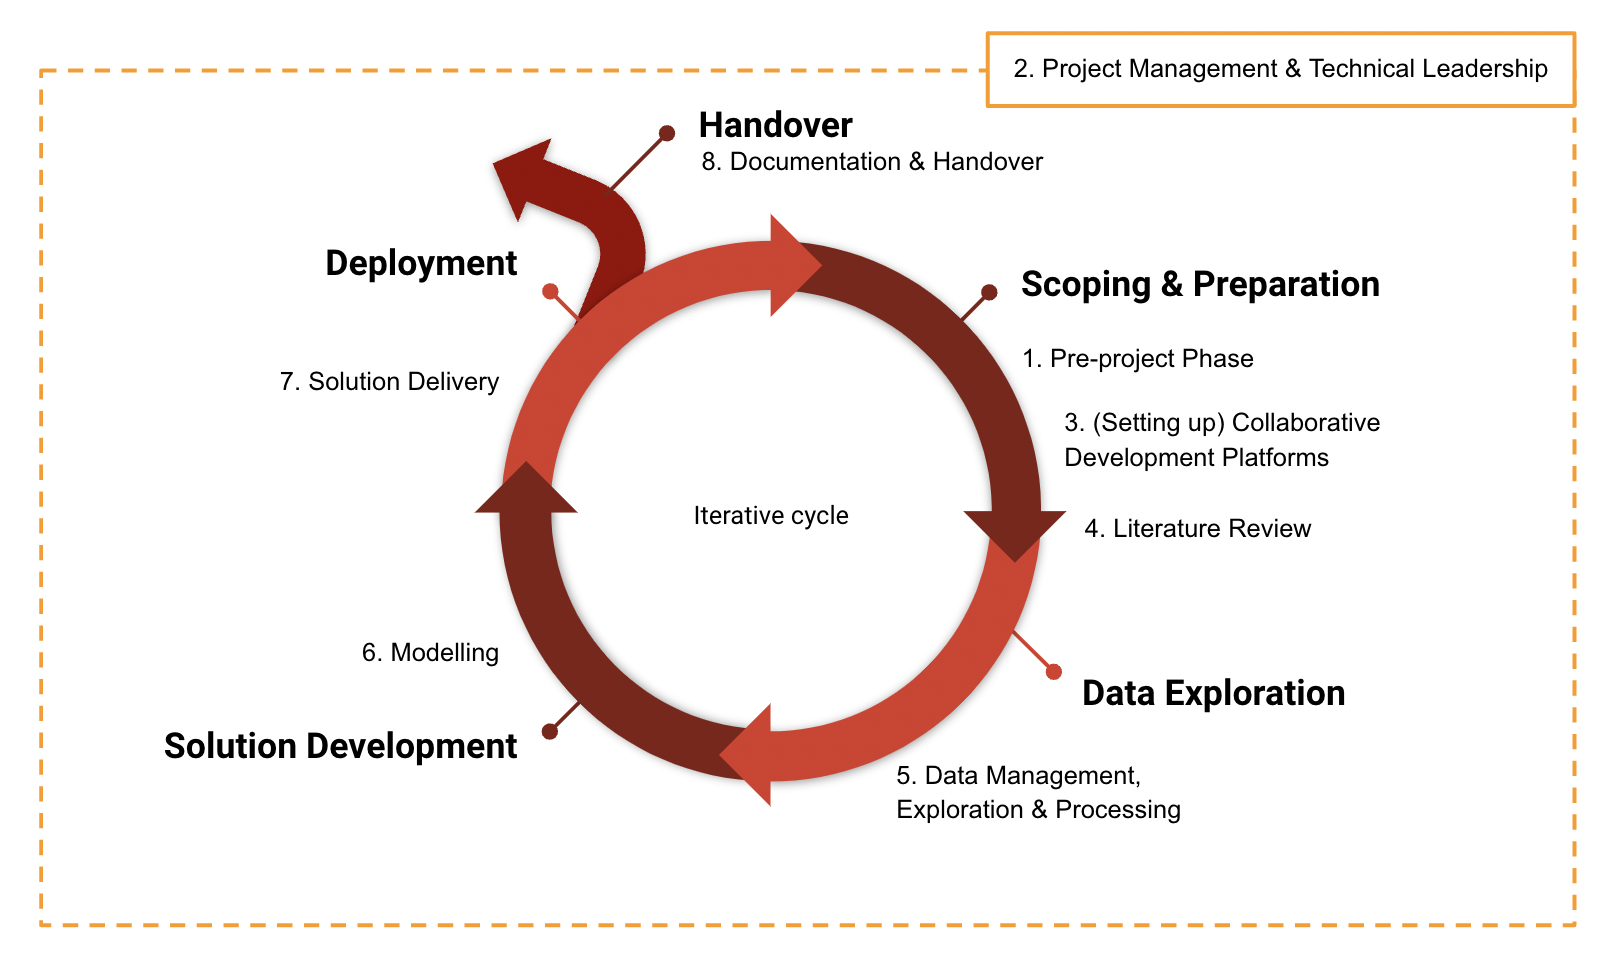 Handbook chapters mapped onto AI development lifecycle